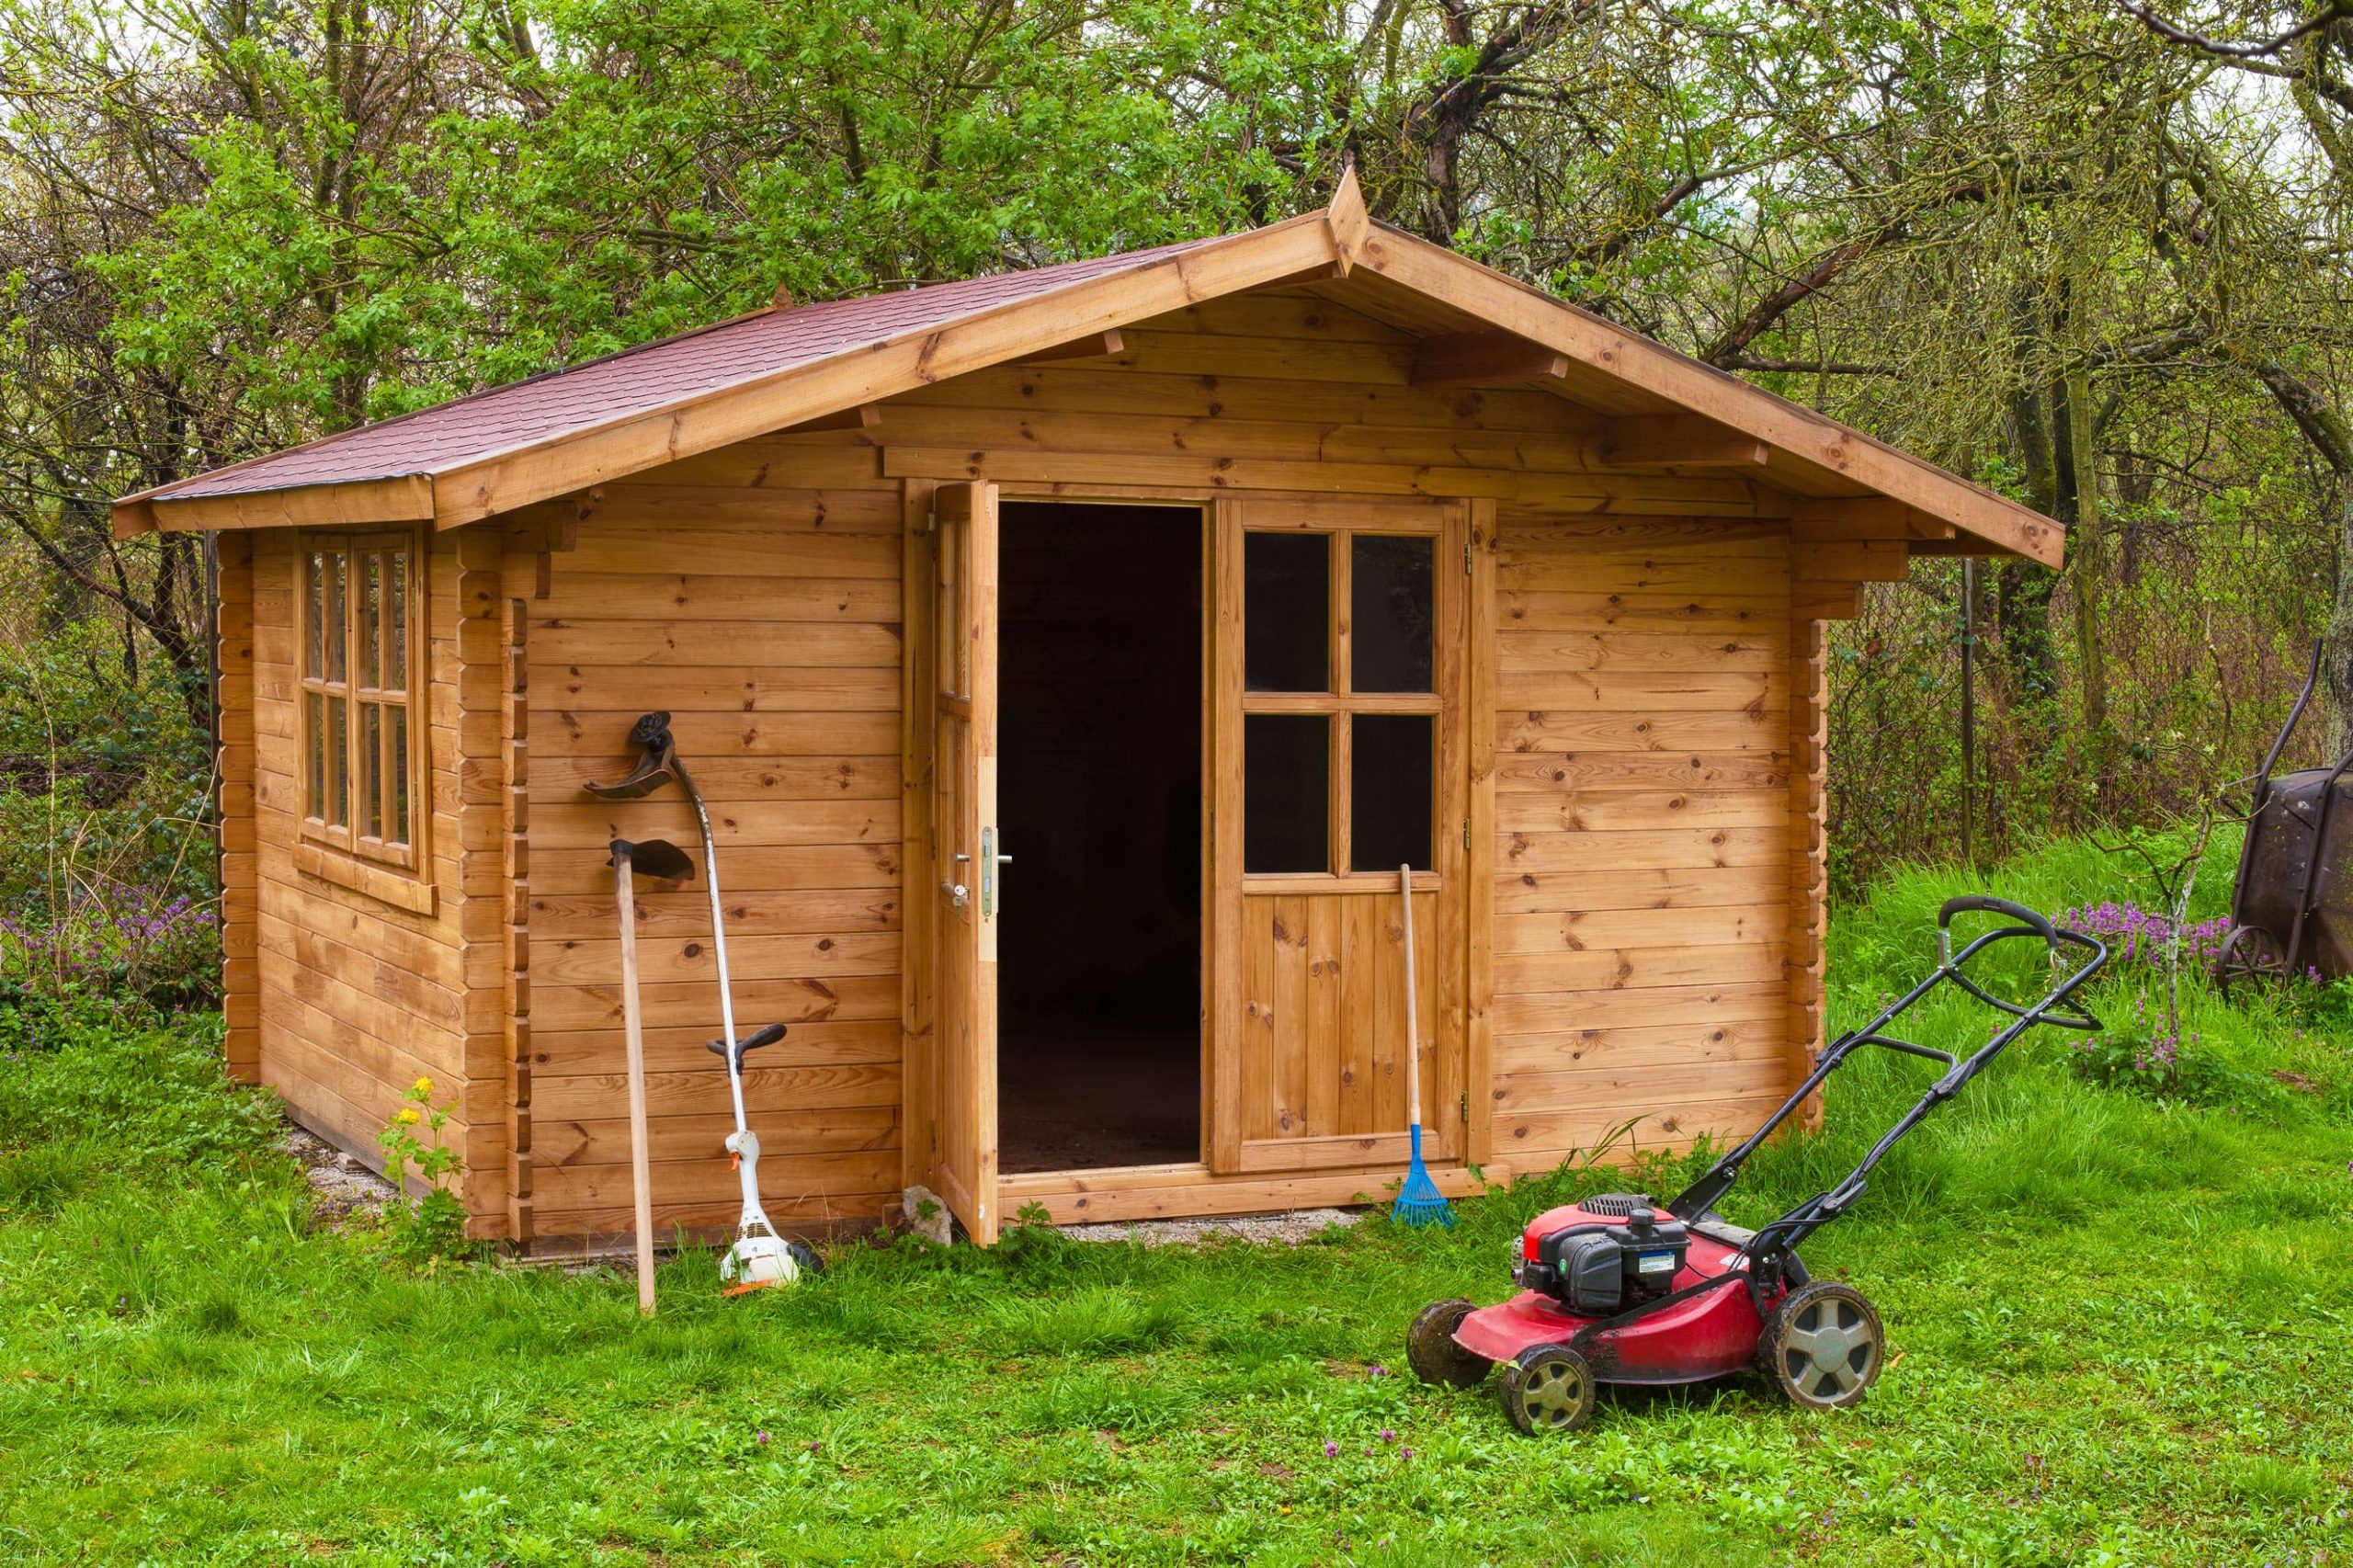 Lawn mower outside a large shed.